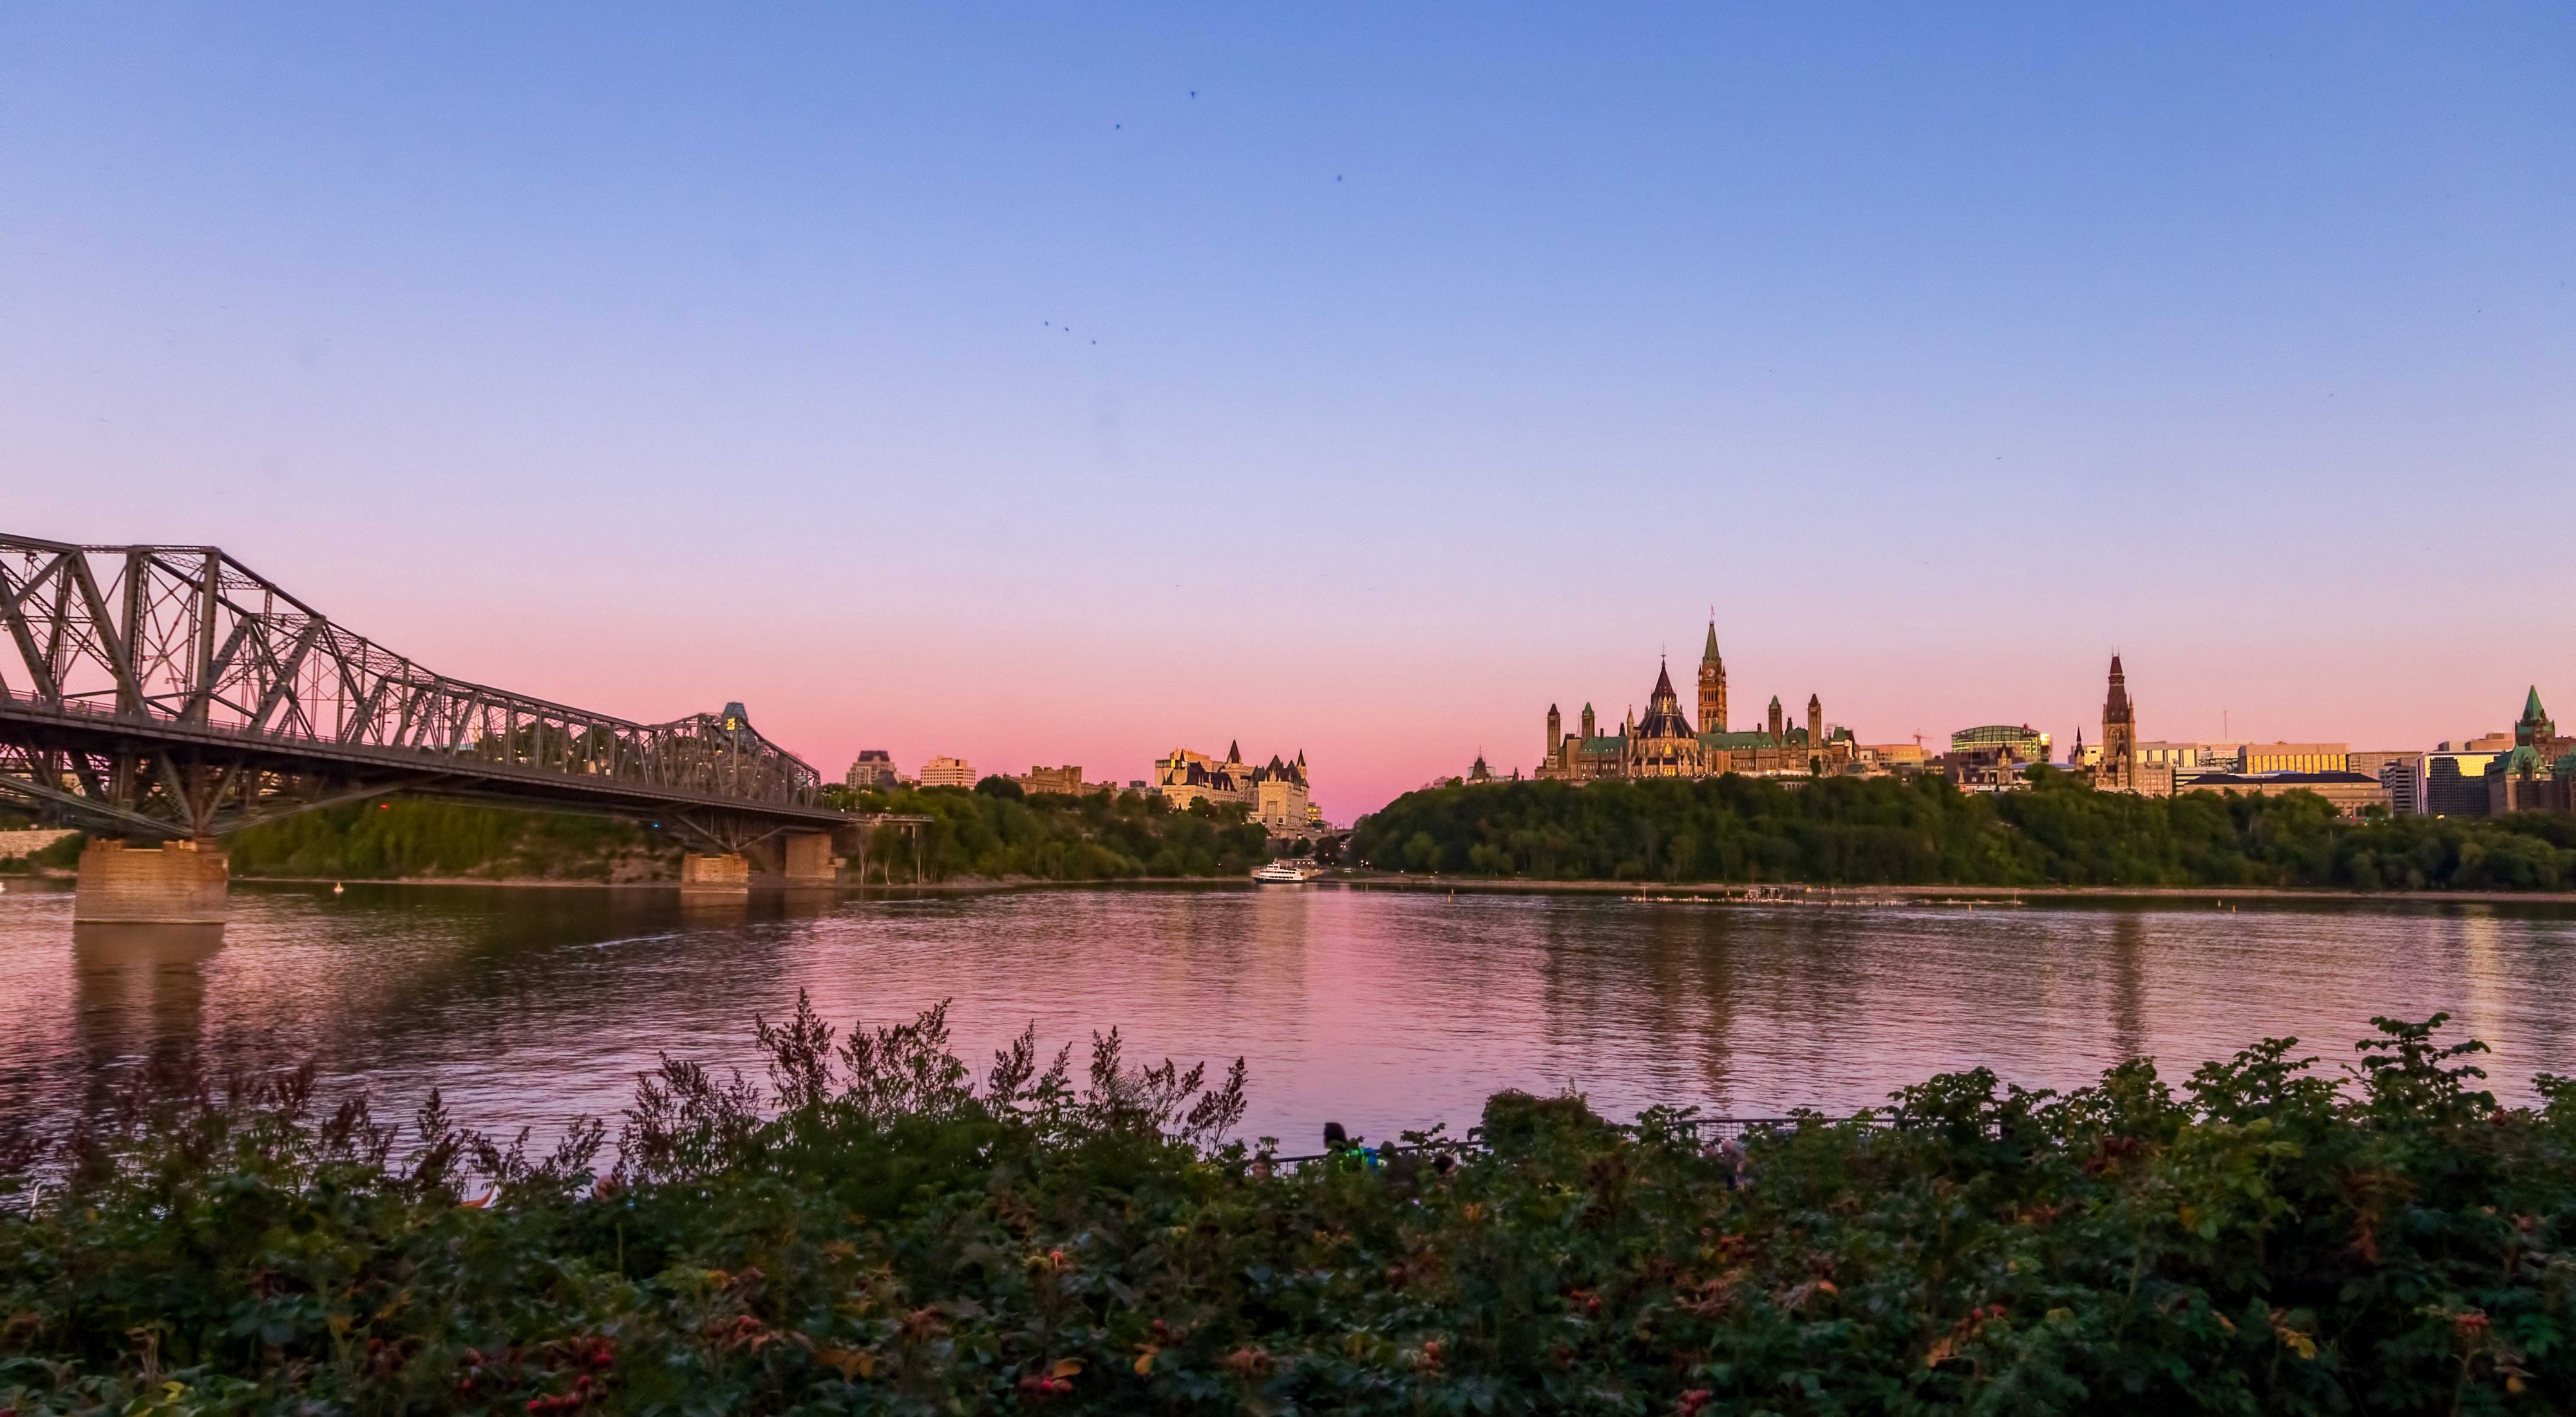 View of downtown Ottawa and the Parliament Buildings of Canada at sunset, taken from Gatineau, Quebec across the Ottawa River